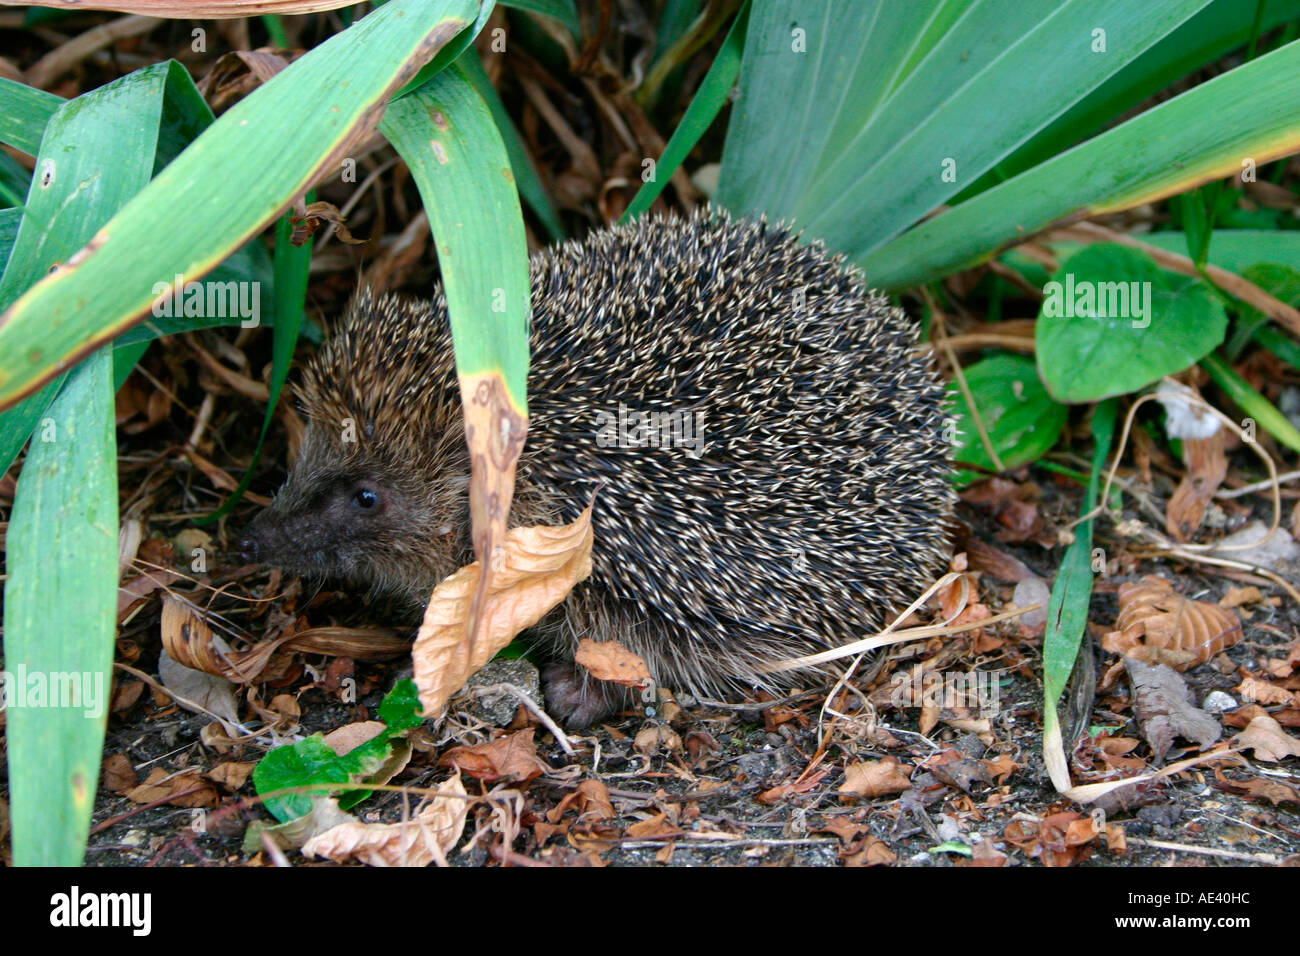 A Hedgehog hiding in the undergrowth. Stock Photo